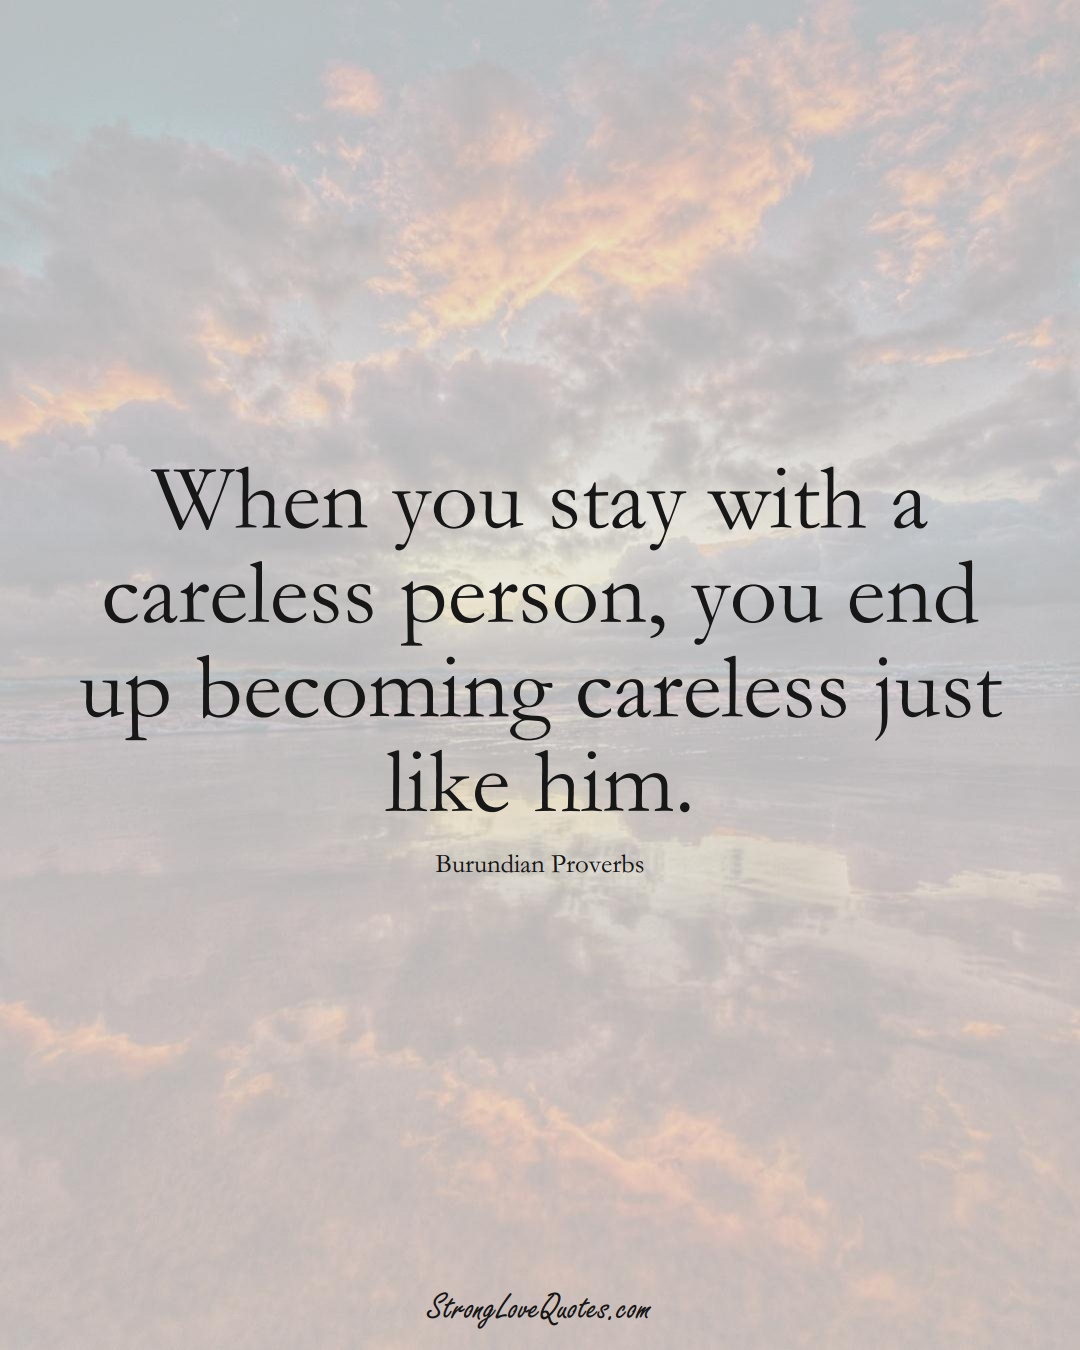 When you stay with a careless person, you end up becoming careless just like him. (Burundian Sayings);  #AfricanSayings